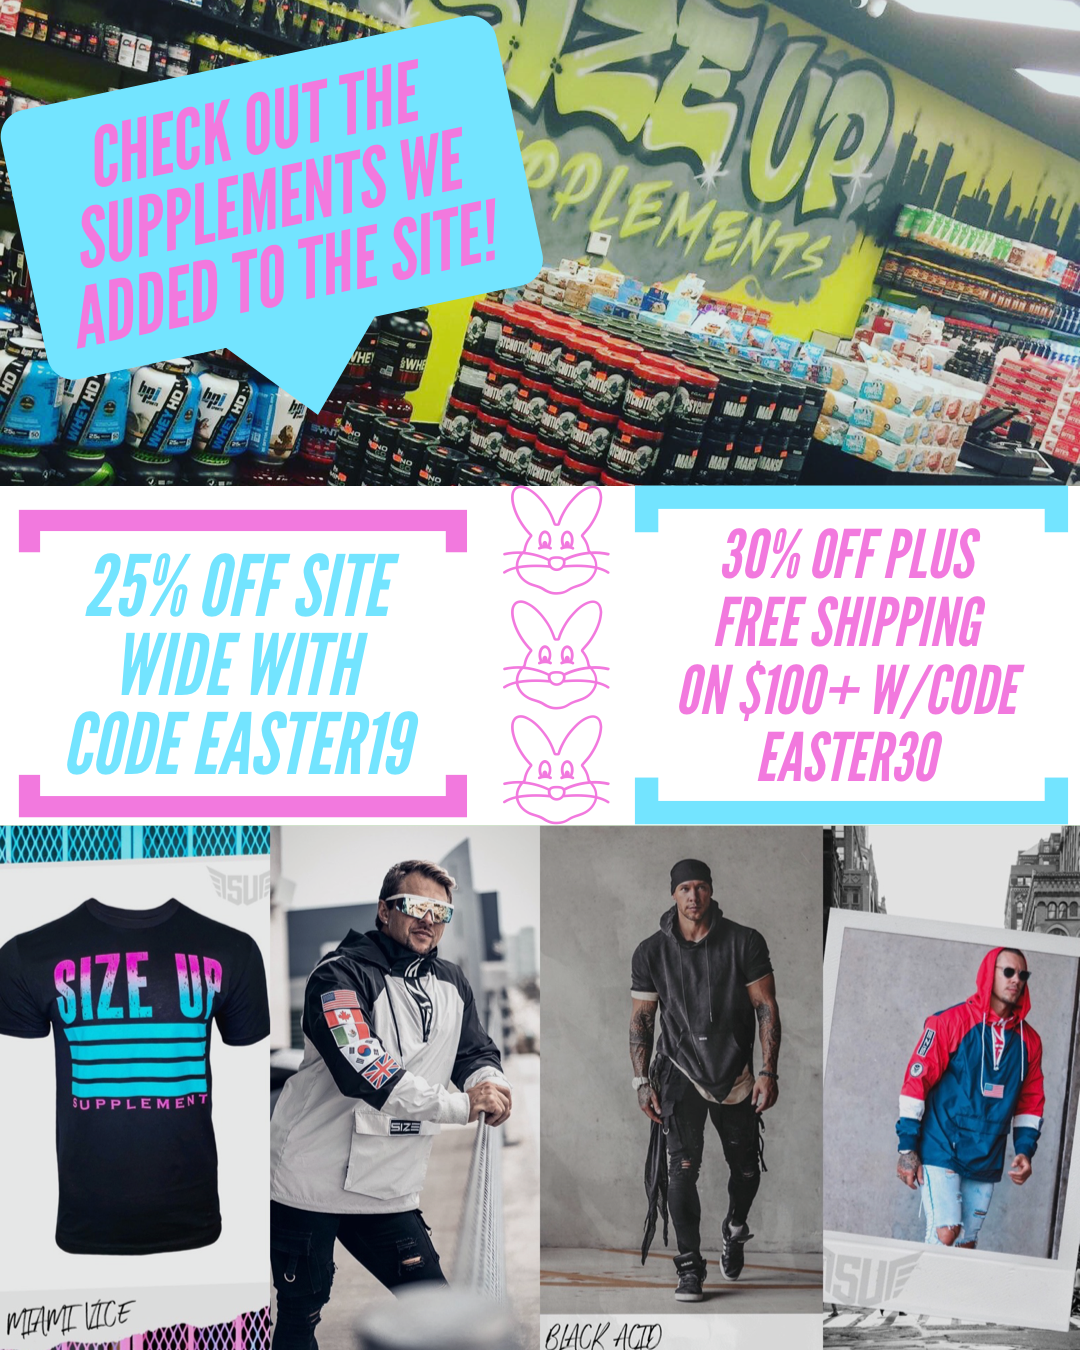 25% OFF SITE WIDE WITH CODE EASTER19